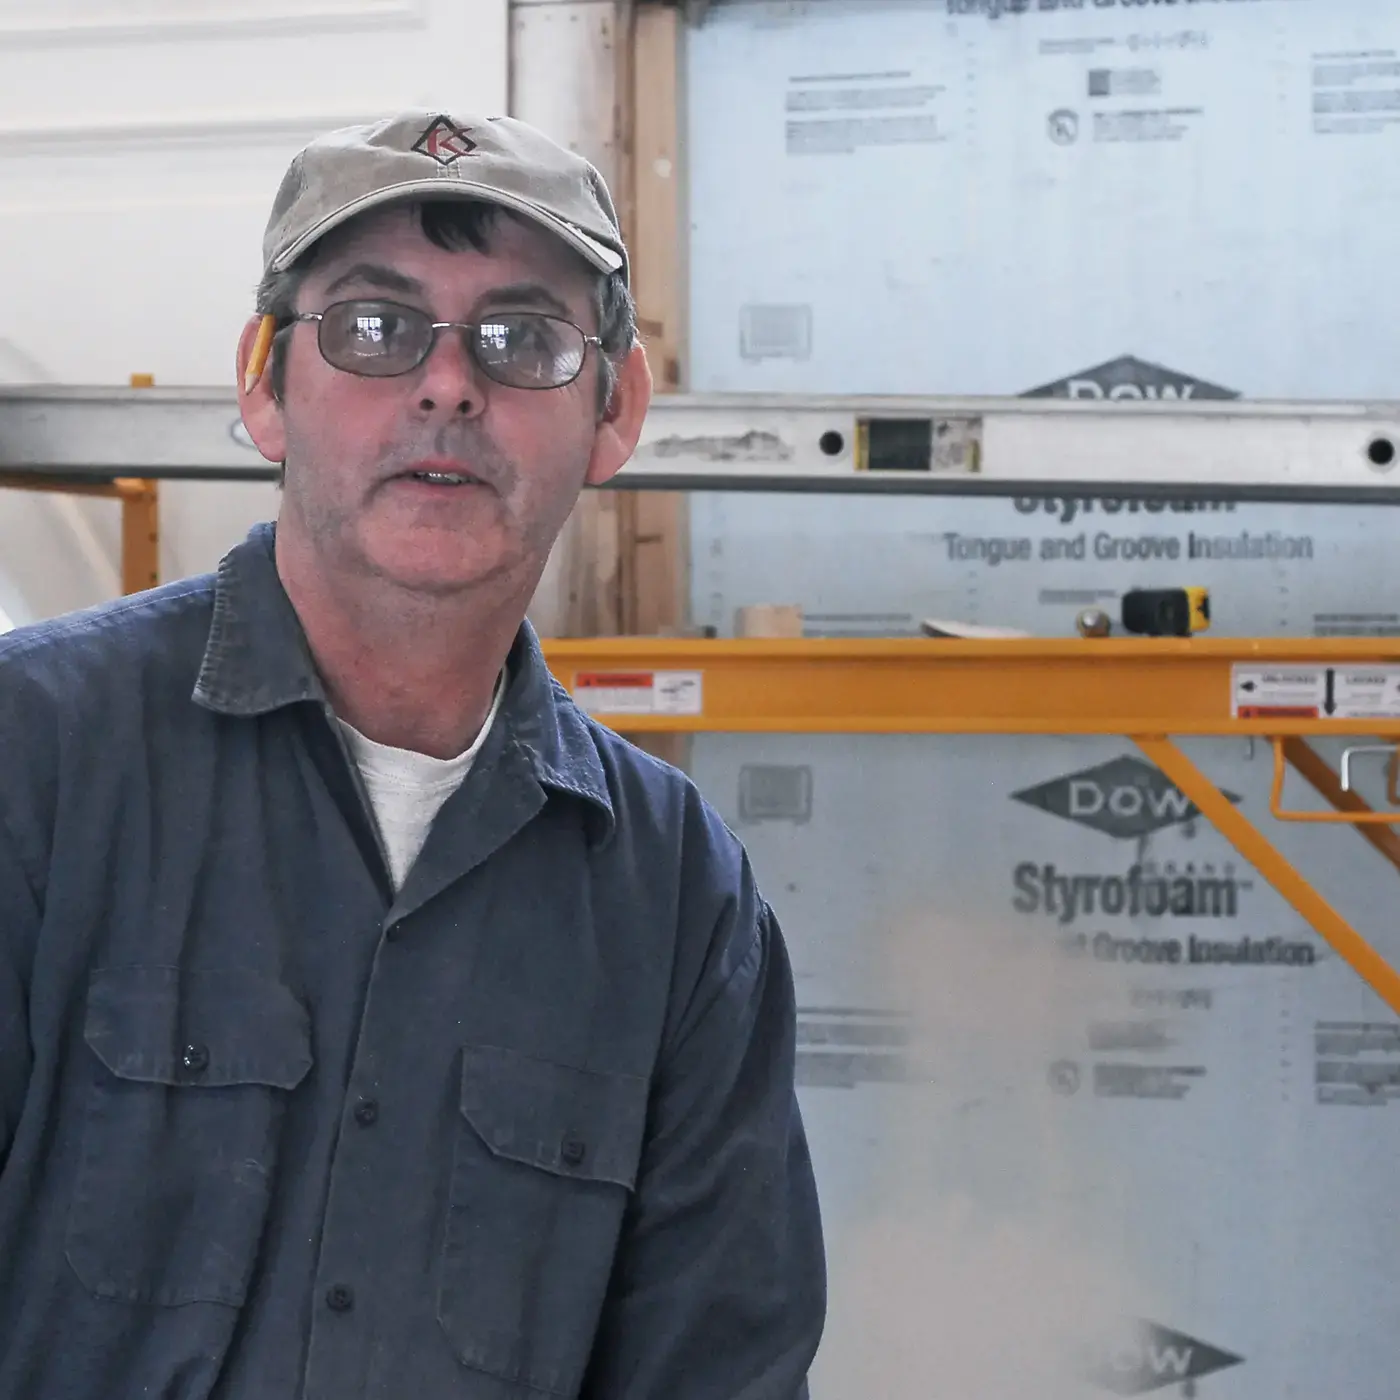 Ronny Hyson is a carpenter for Knickerbocker Group